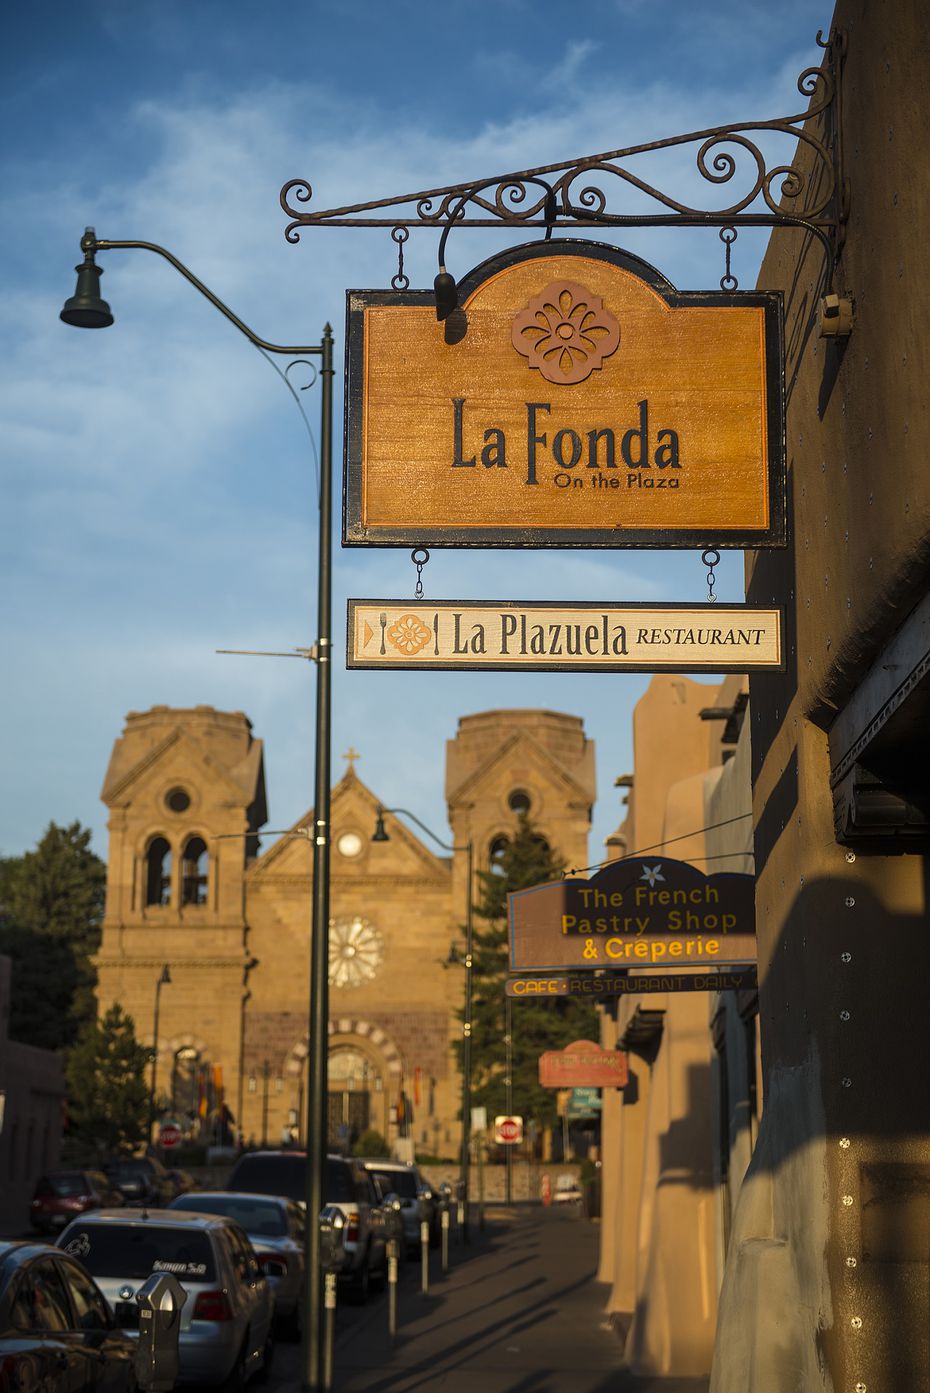 A historic sign welcomes guests to the La Fonda on the Plaza hotel in Santa Fe.